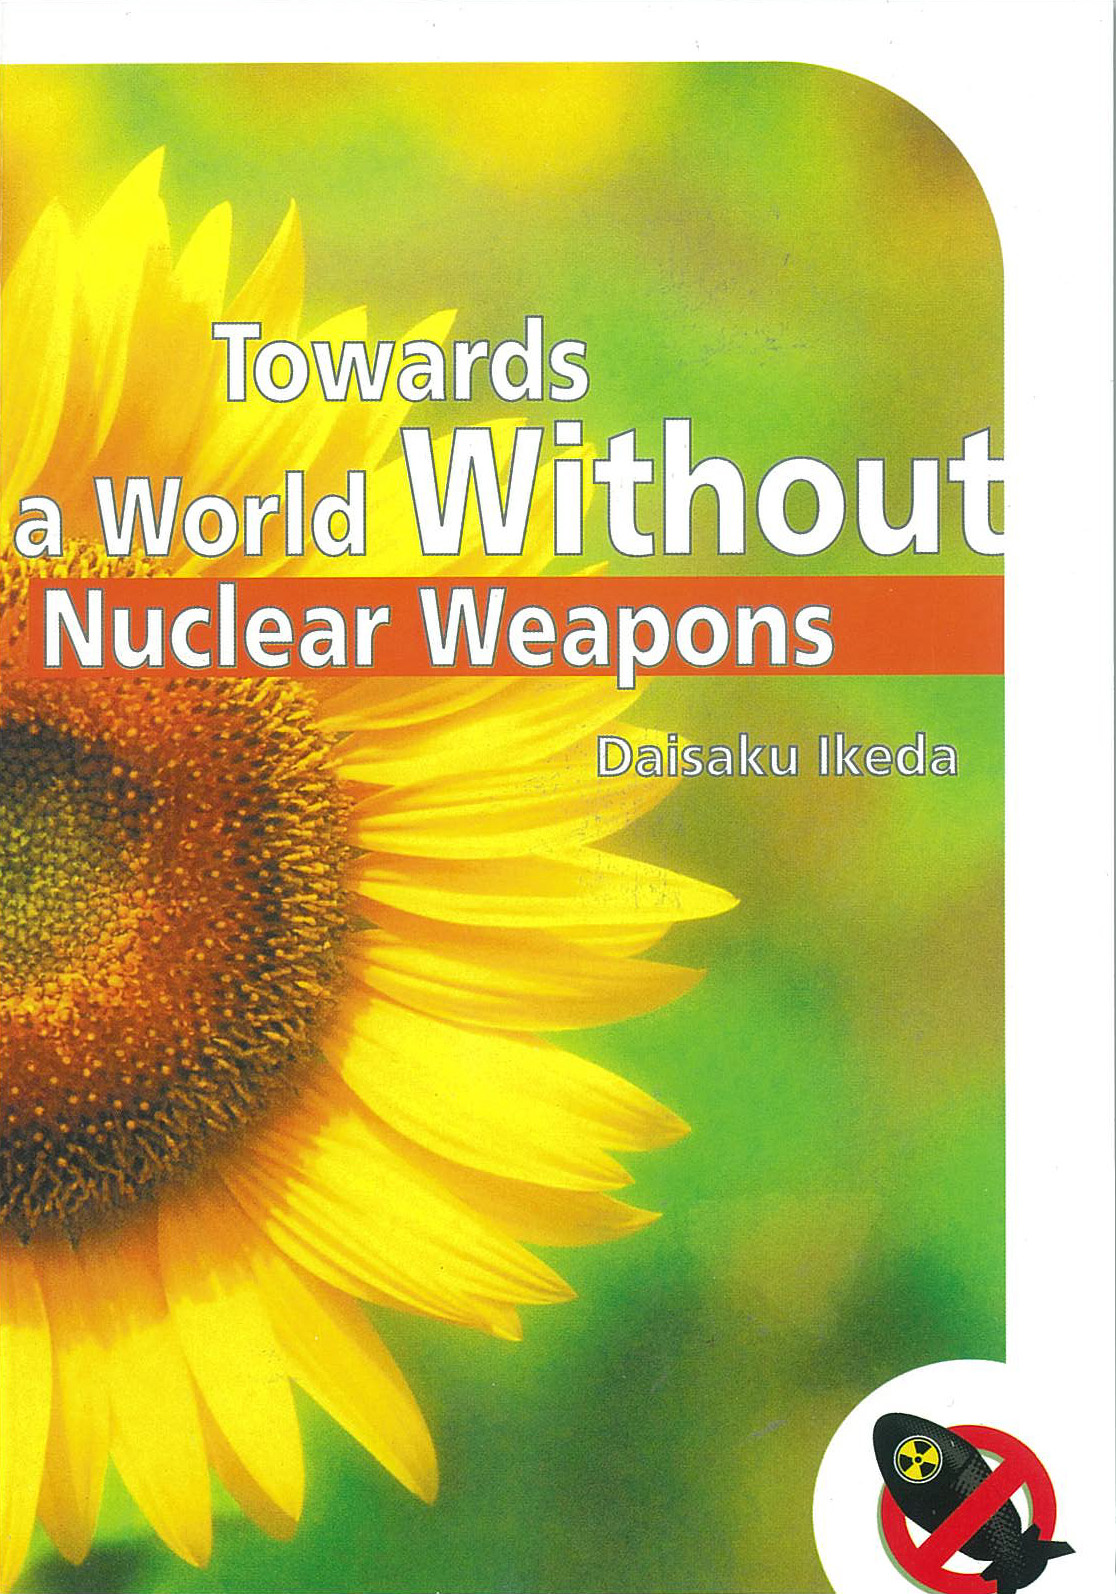 Towards a World Without Nuclear Weapon